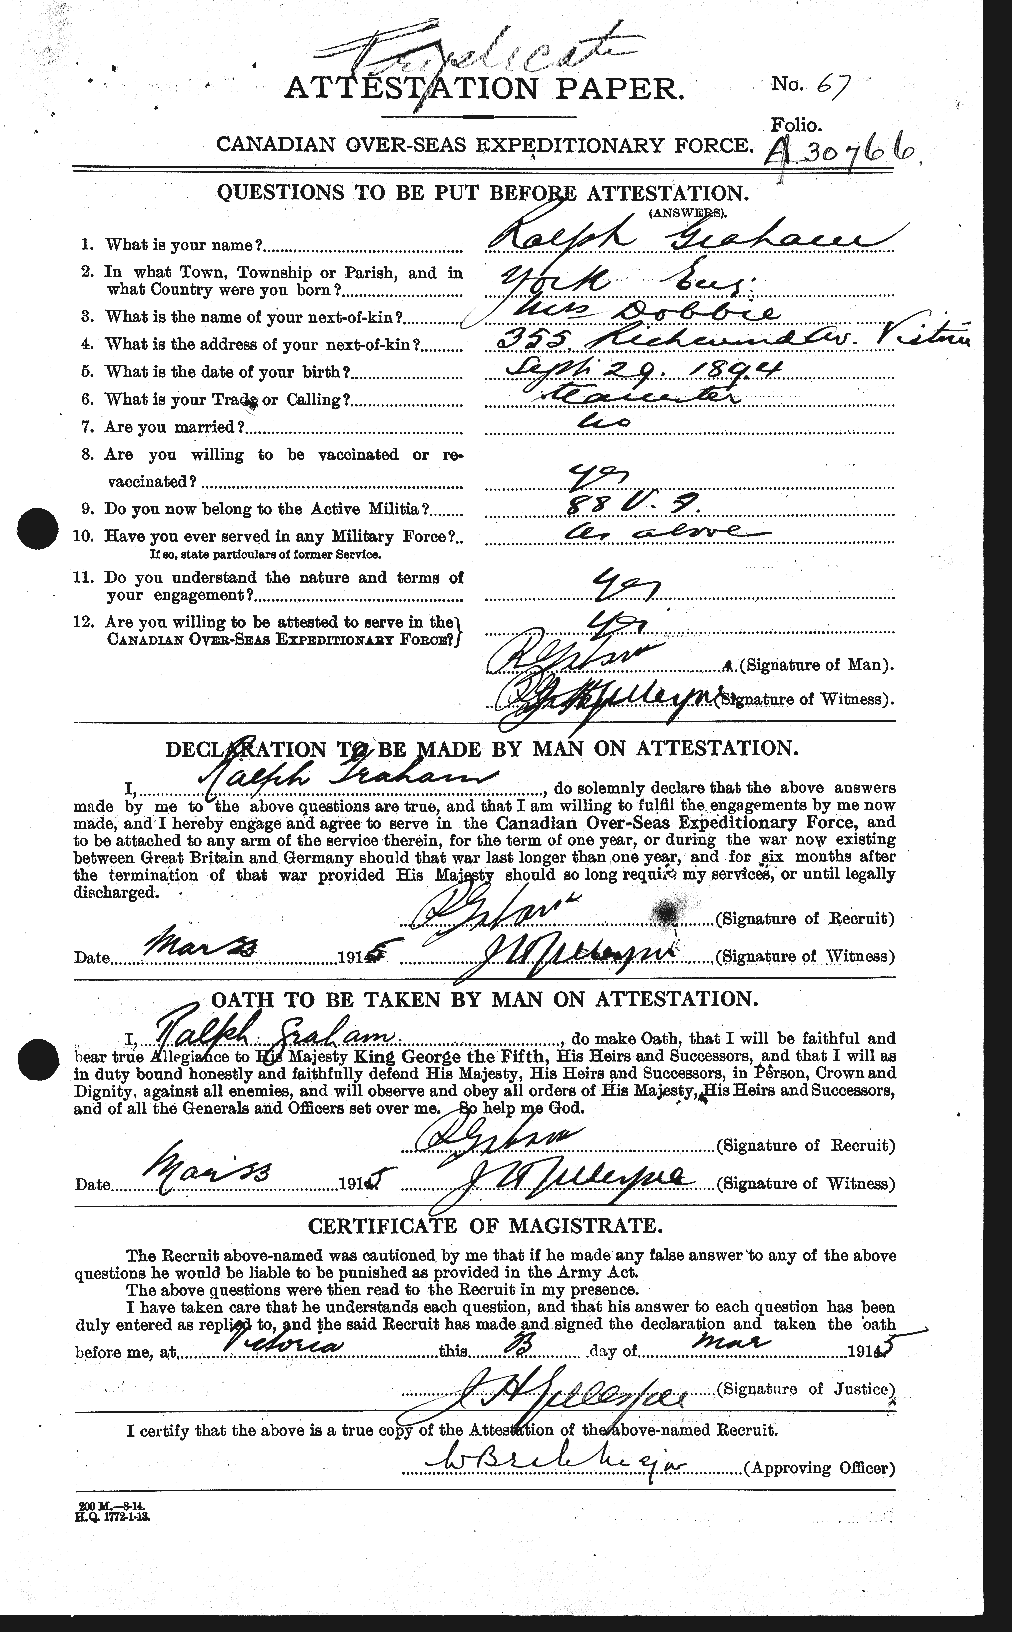 Personnel Records of the First World War - CEF 359353a